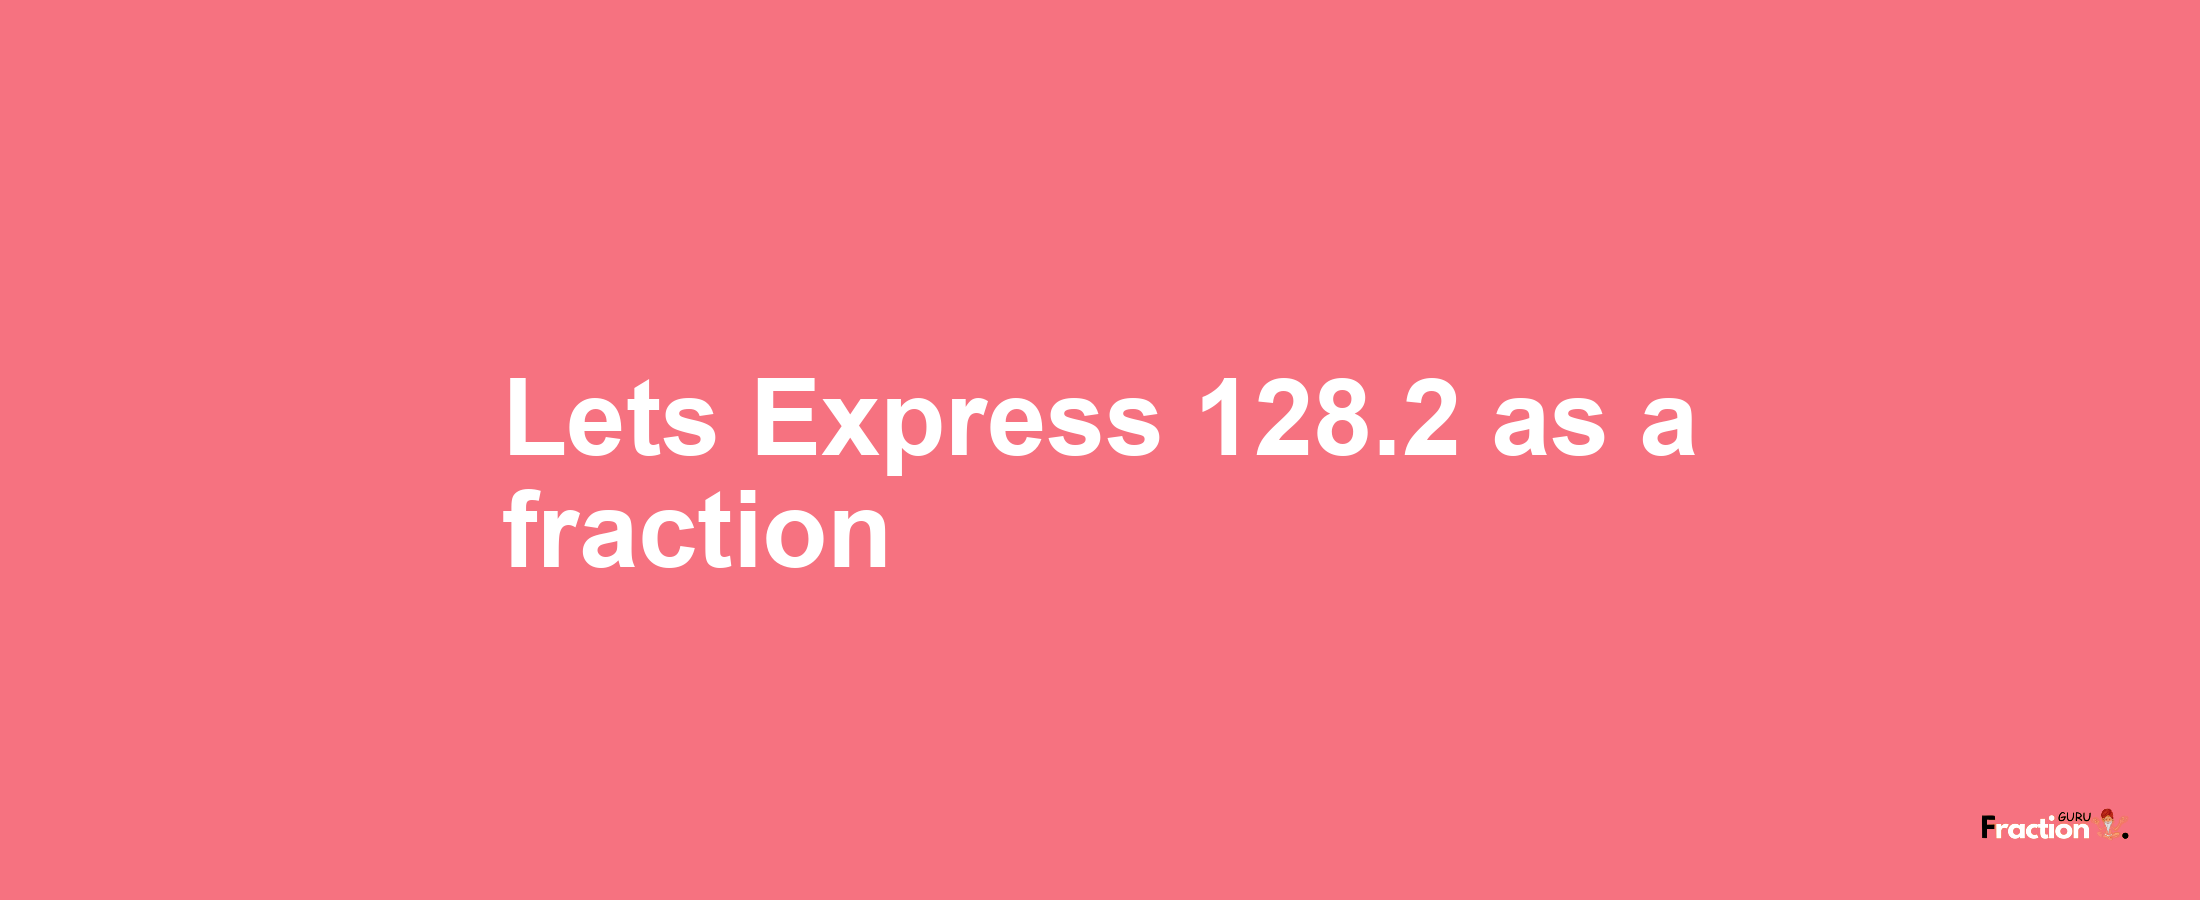 Lets Express 128.2 as afraction